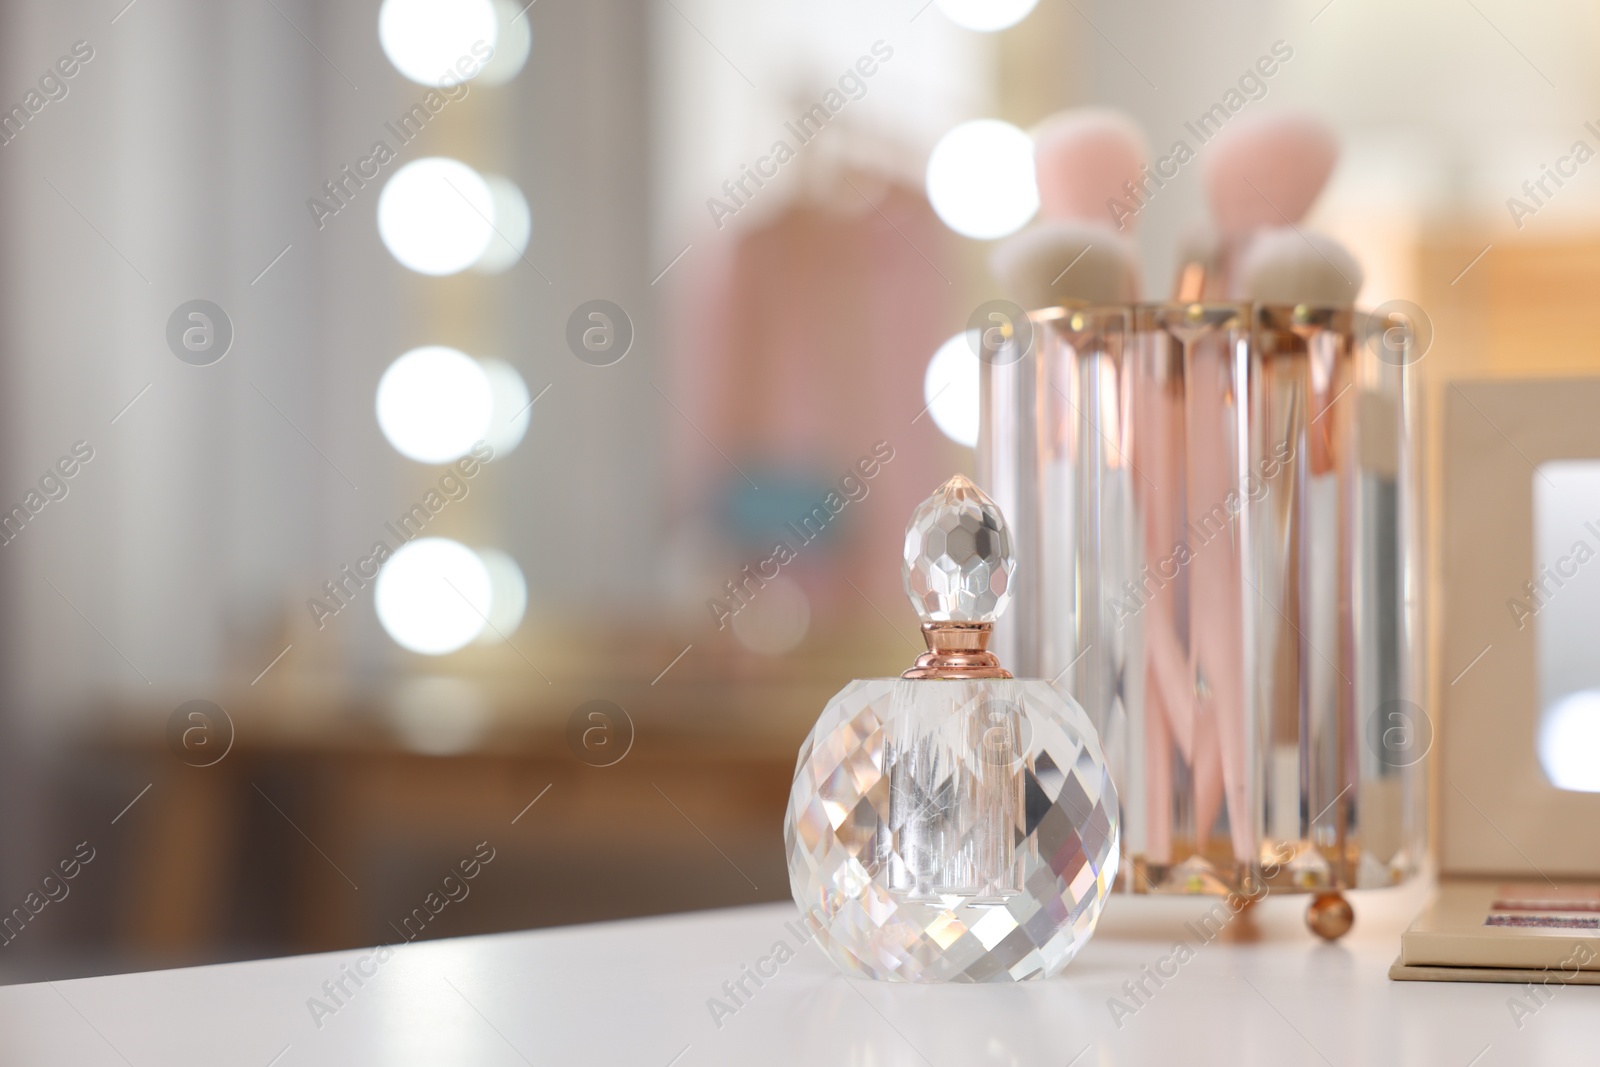 Photo of Bottle of perfume on white table in makeup room, space for text